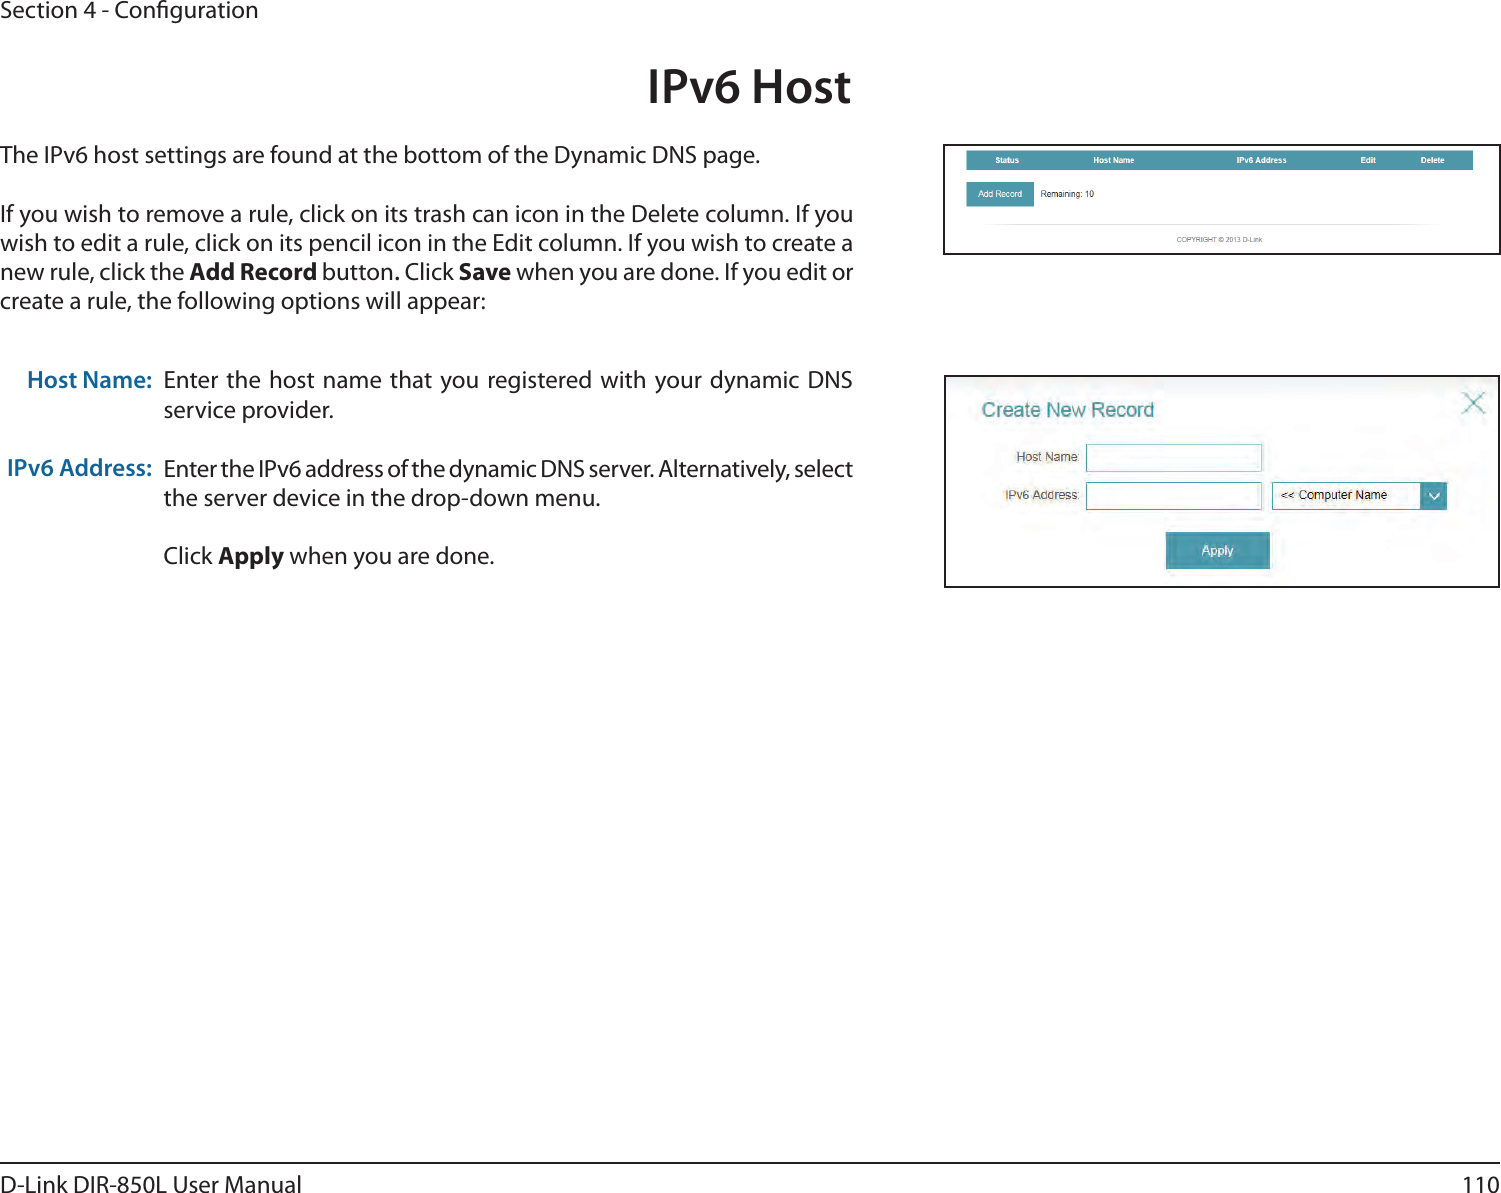 110D-Link DIR-850L User ManualSection 4 - CongurationEnter the host name that you registered with your dynamic DNS service provider.Enter the IPv6 address of the dynamic DNS server. Alternatively, select the server device in the drop-down menu. Click Apply when you are done.Host Name:IPv6 Address:The IPv6 host settings are found at the bottom of the Dynamic DNS page.If you wish to remove a rule, click on its trash can icon in the Delete column. If you wish to edit a rule, click on its pencil icon in the Edit column. If you wish to create a new rule, click the Add Record button. Click Save when you are done. If you edit or create a rule, the following options will appear:IPv6 Host